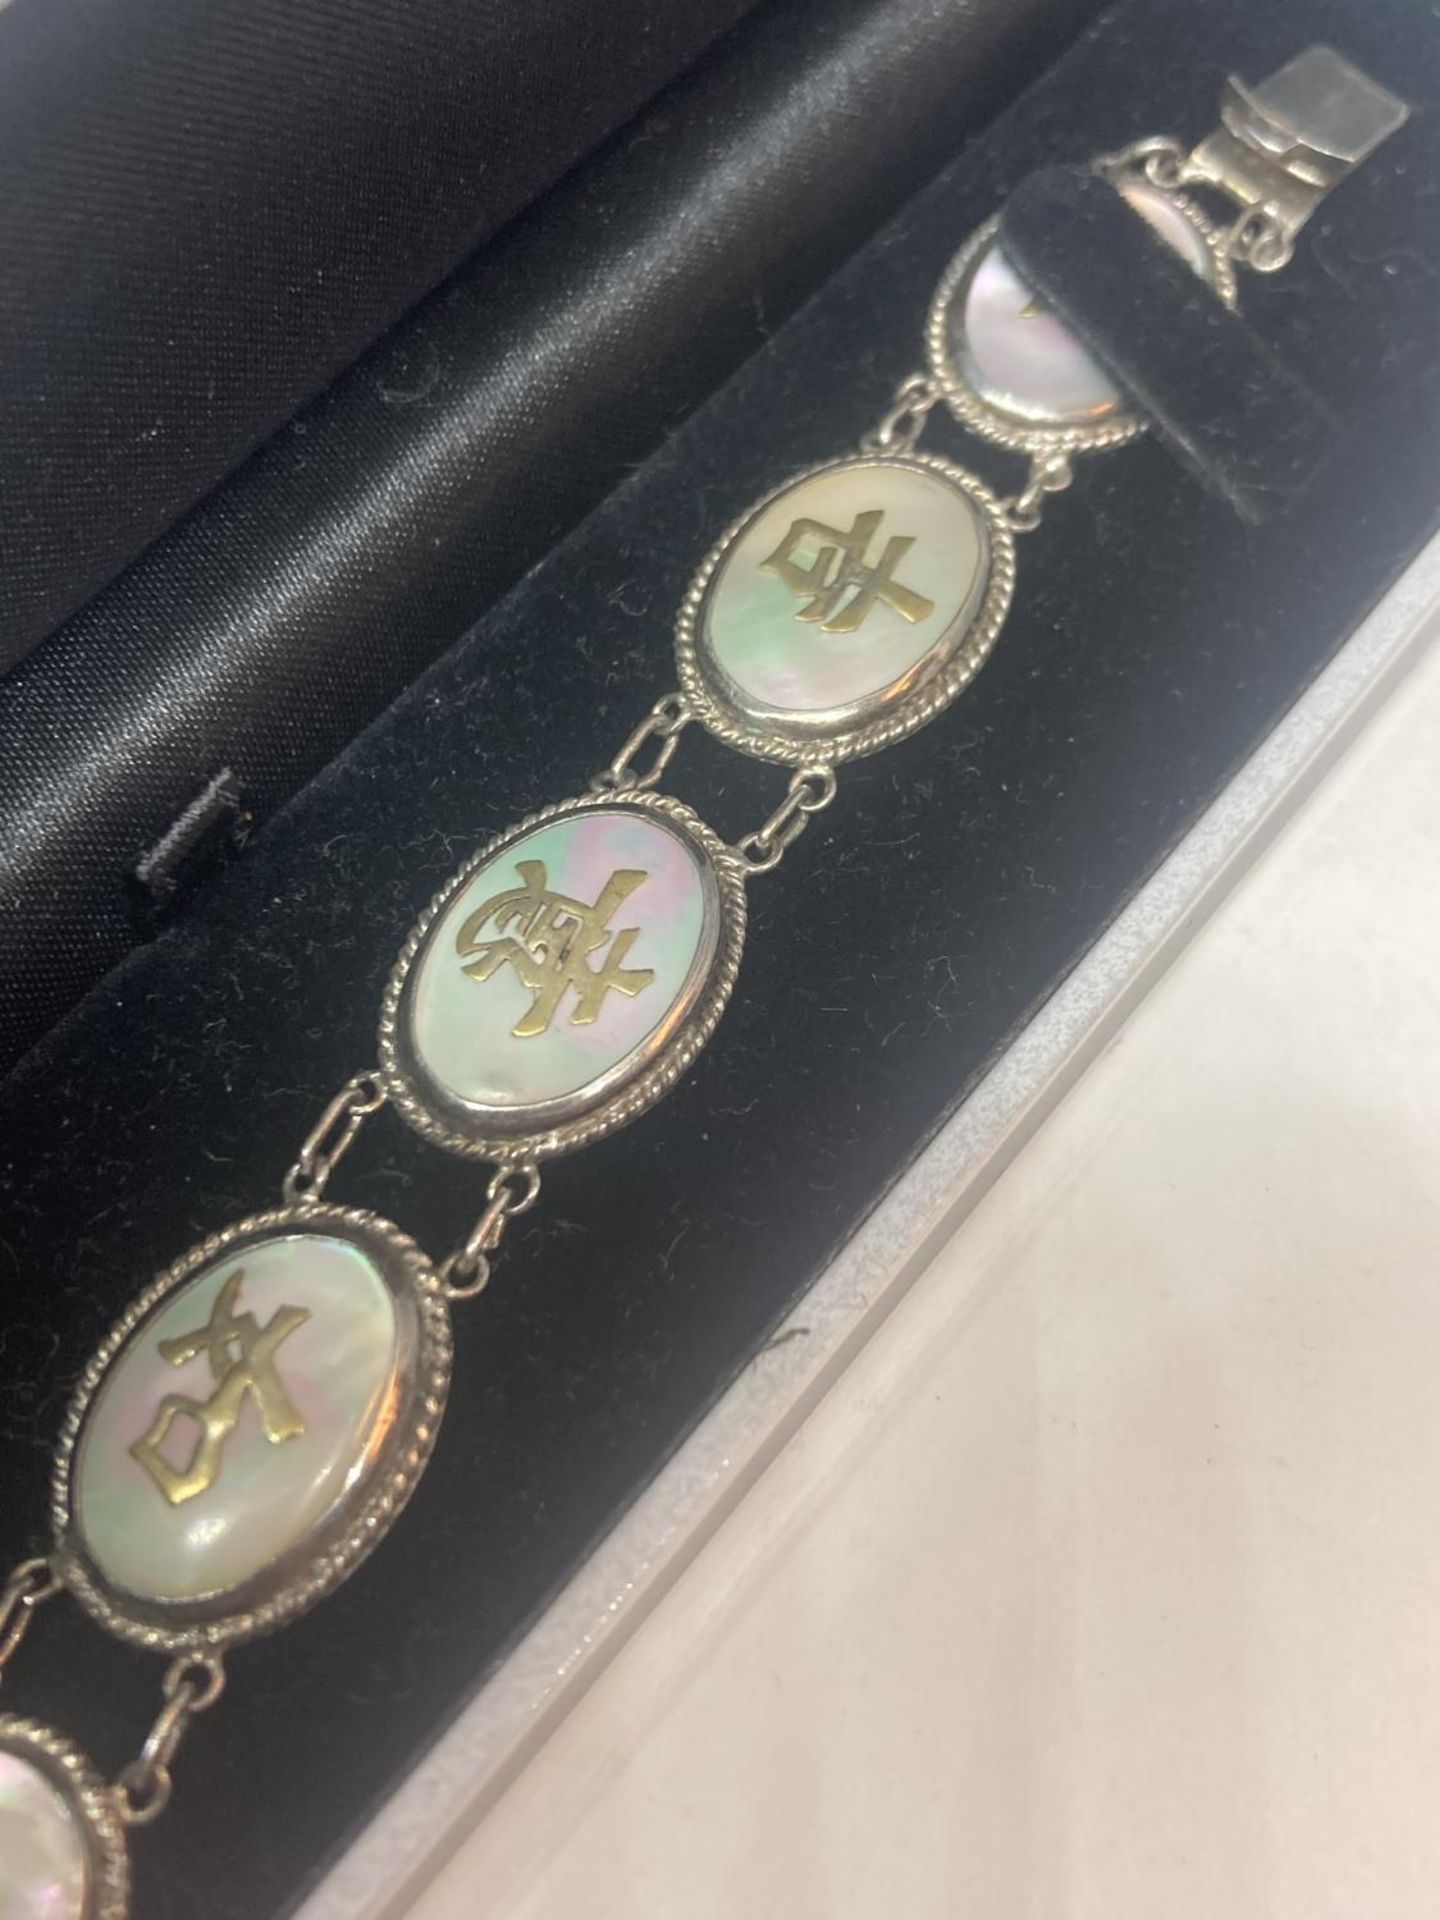 AN ORIENTAL SILVER AND MOTHER OF PEARL CHARACTER LINK BRACELET IN A PRESENTATION BOX - Image 6 of 10